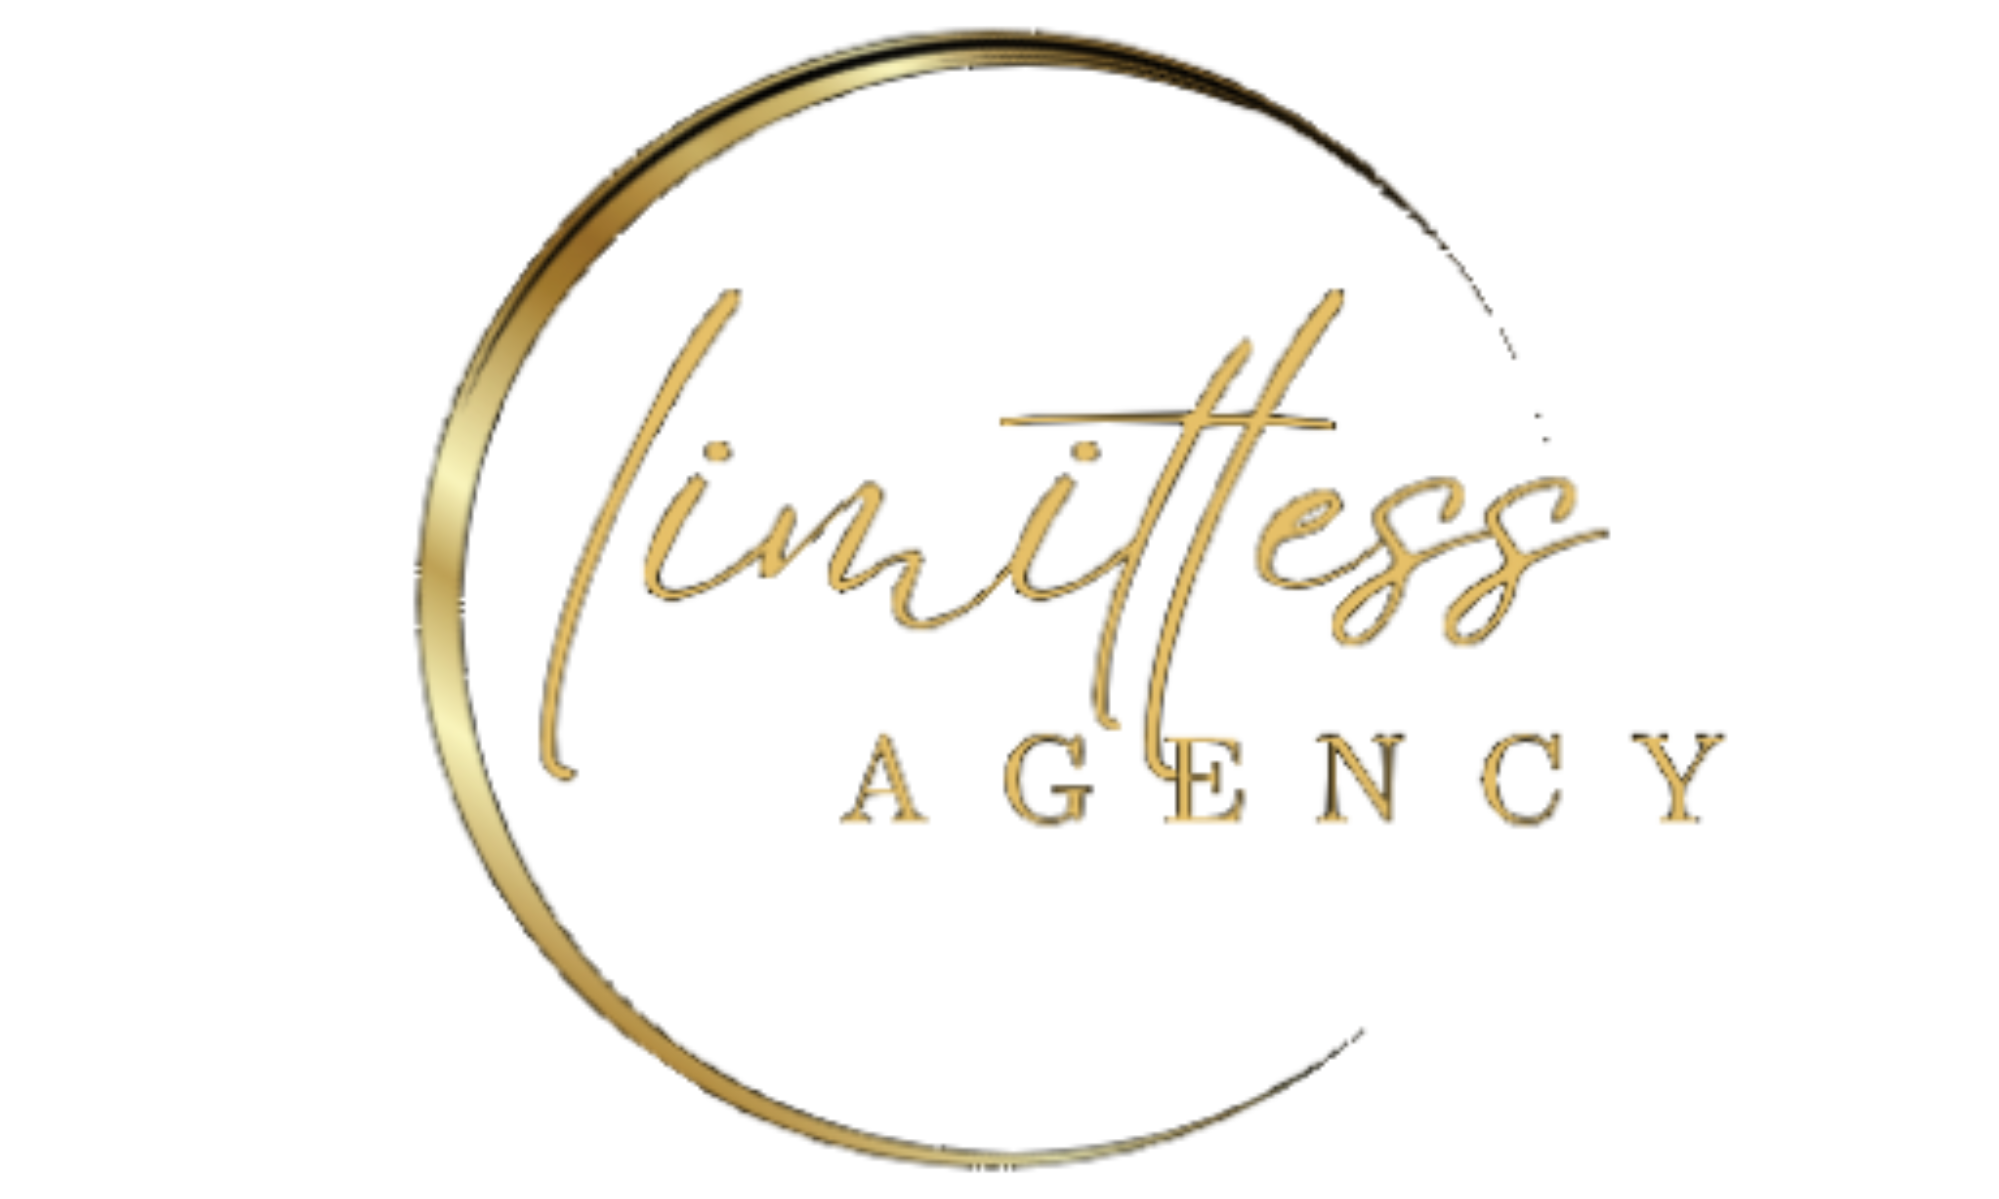 LIMITLESS AGENCY